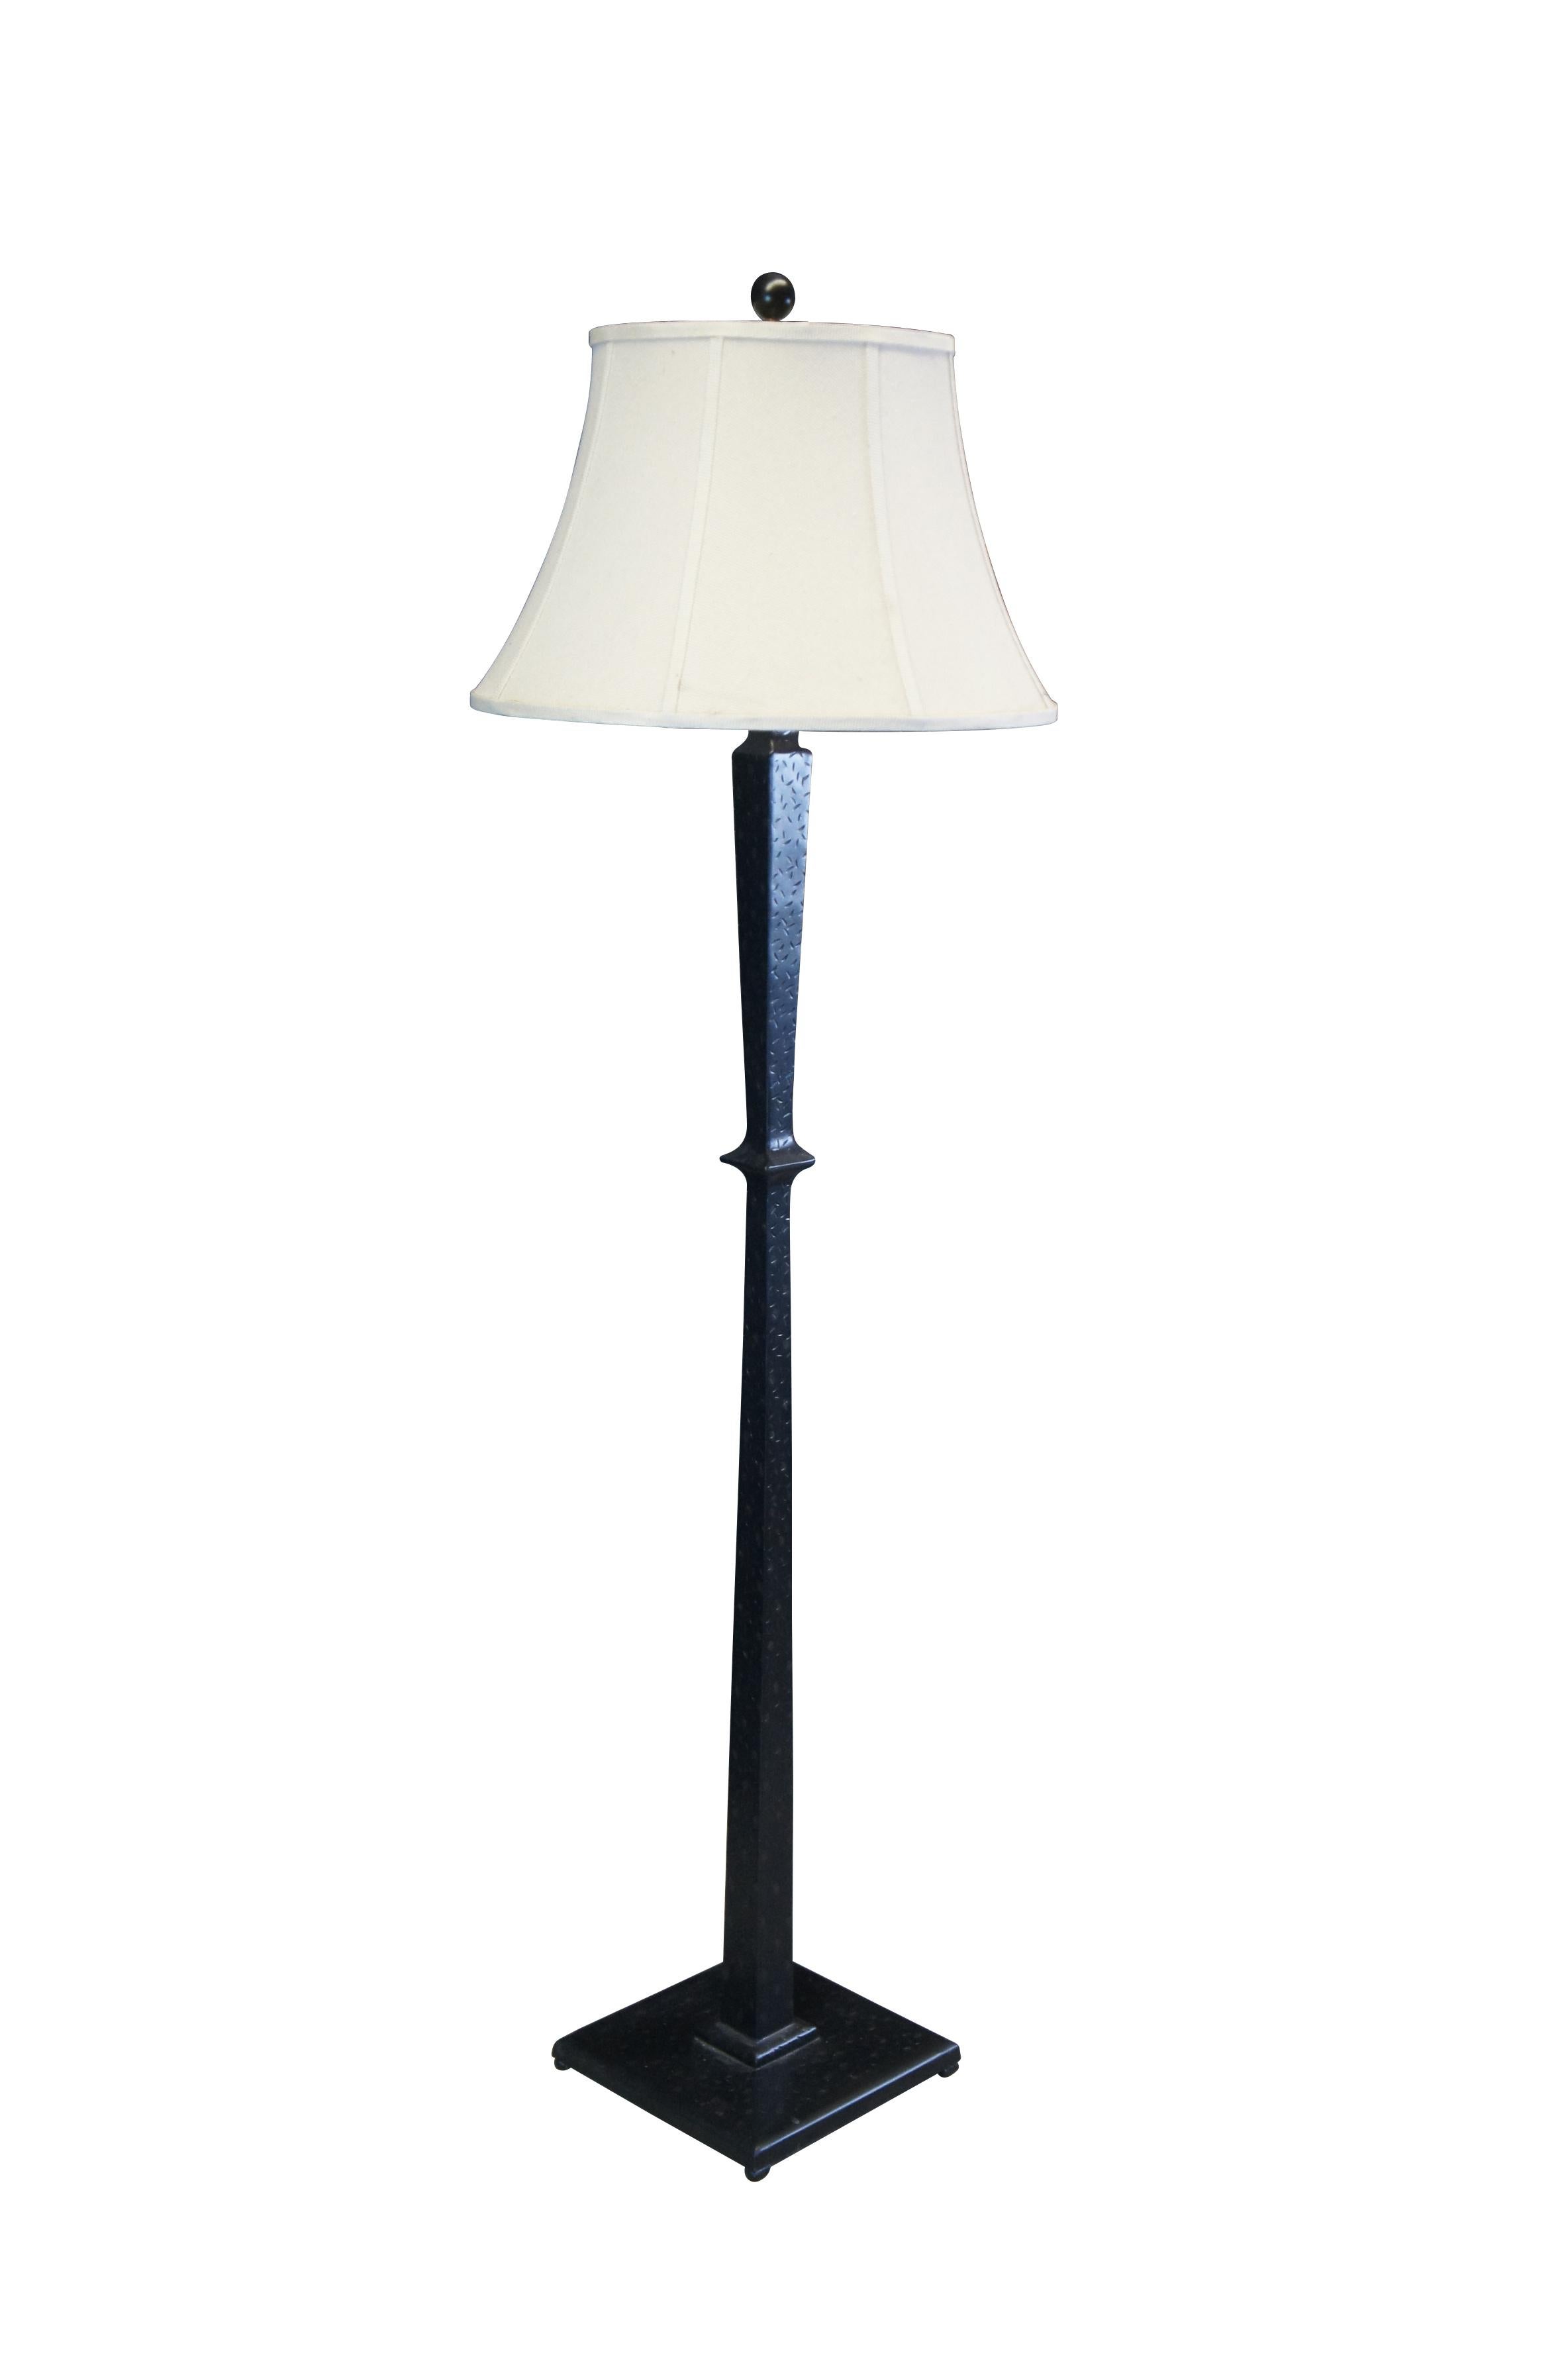 Distressed iron floor lamp.  Features a square center and base with tapered shade.

Dimensions:
66